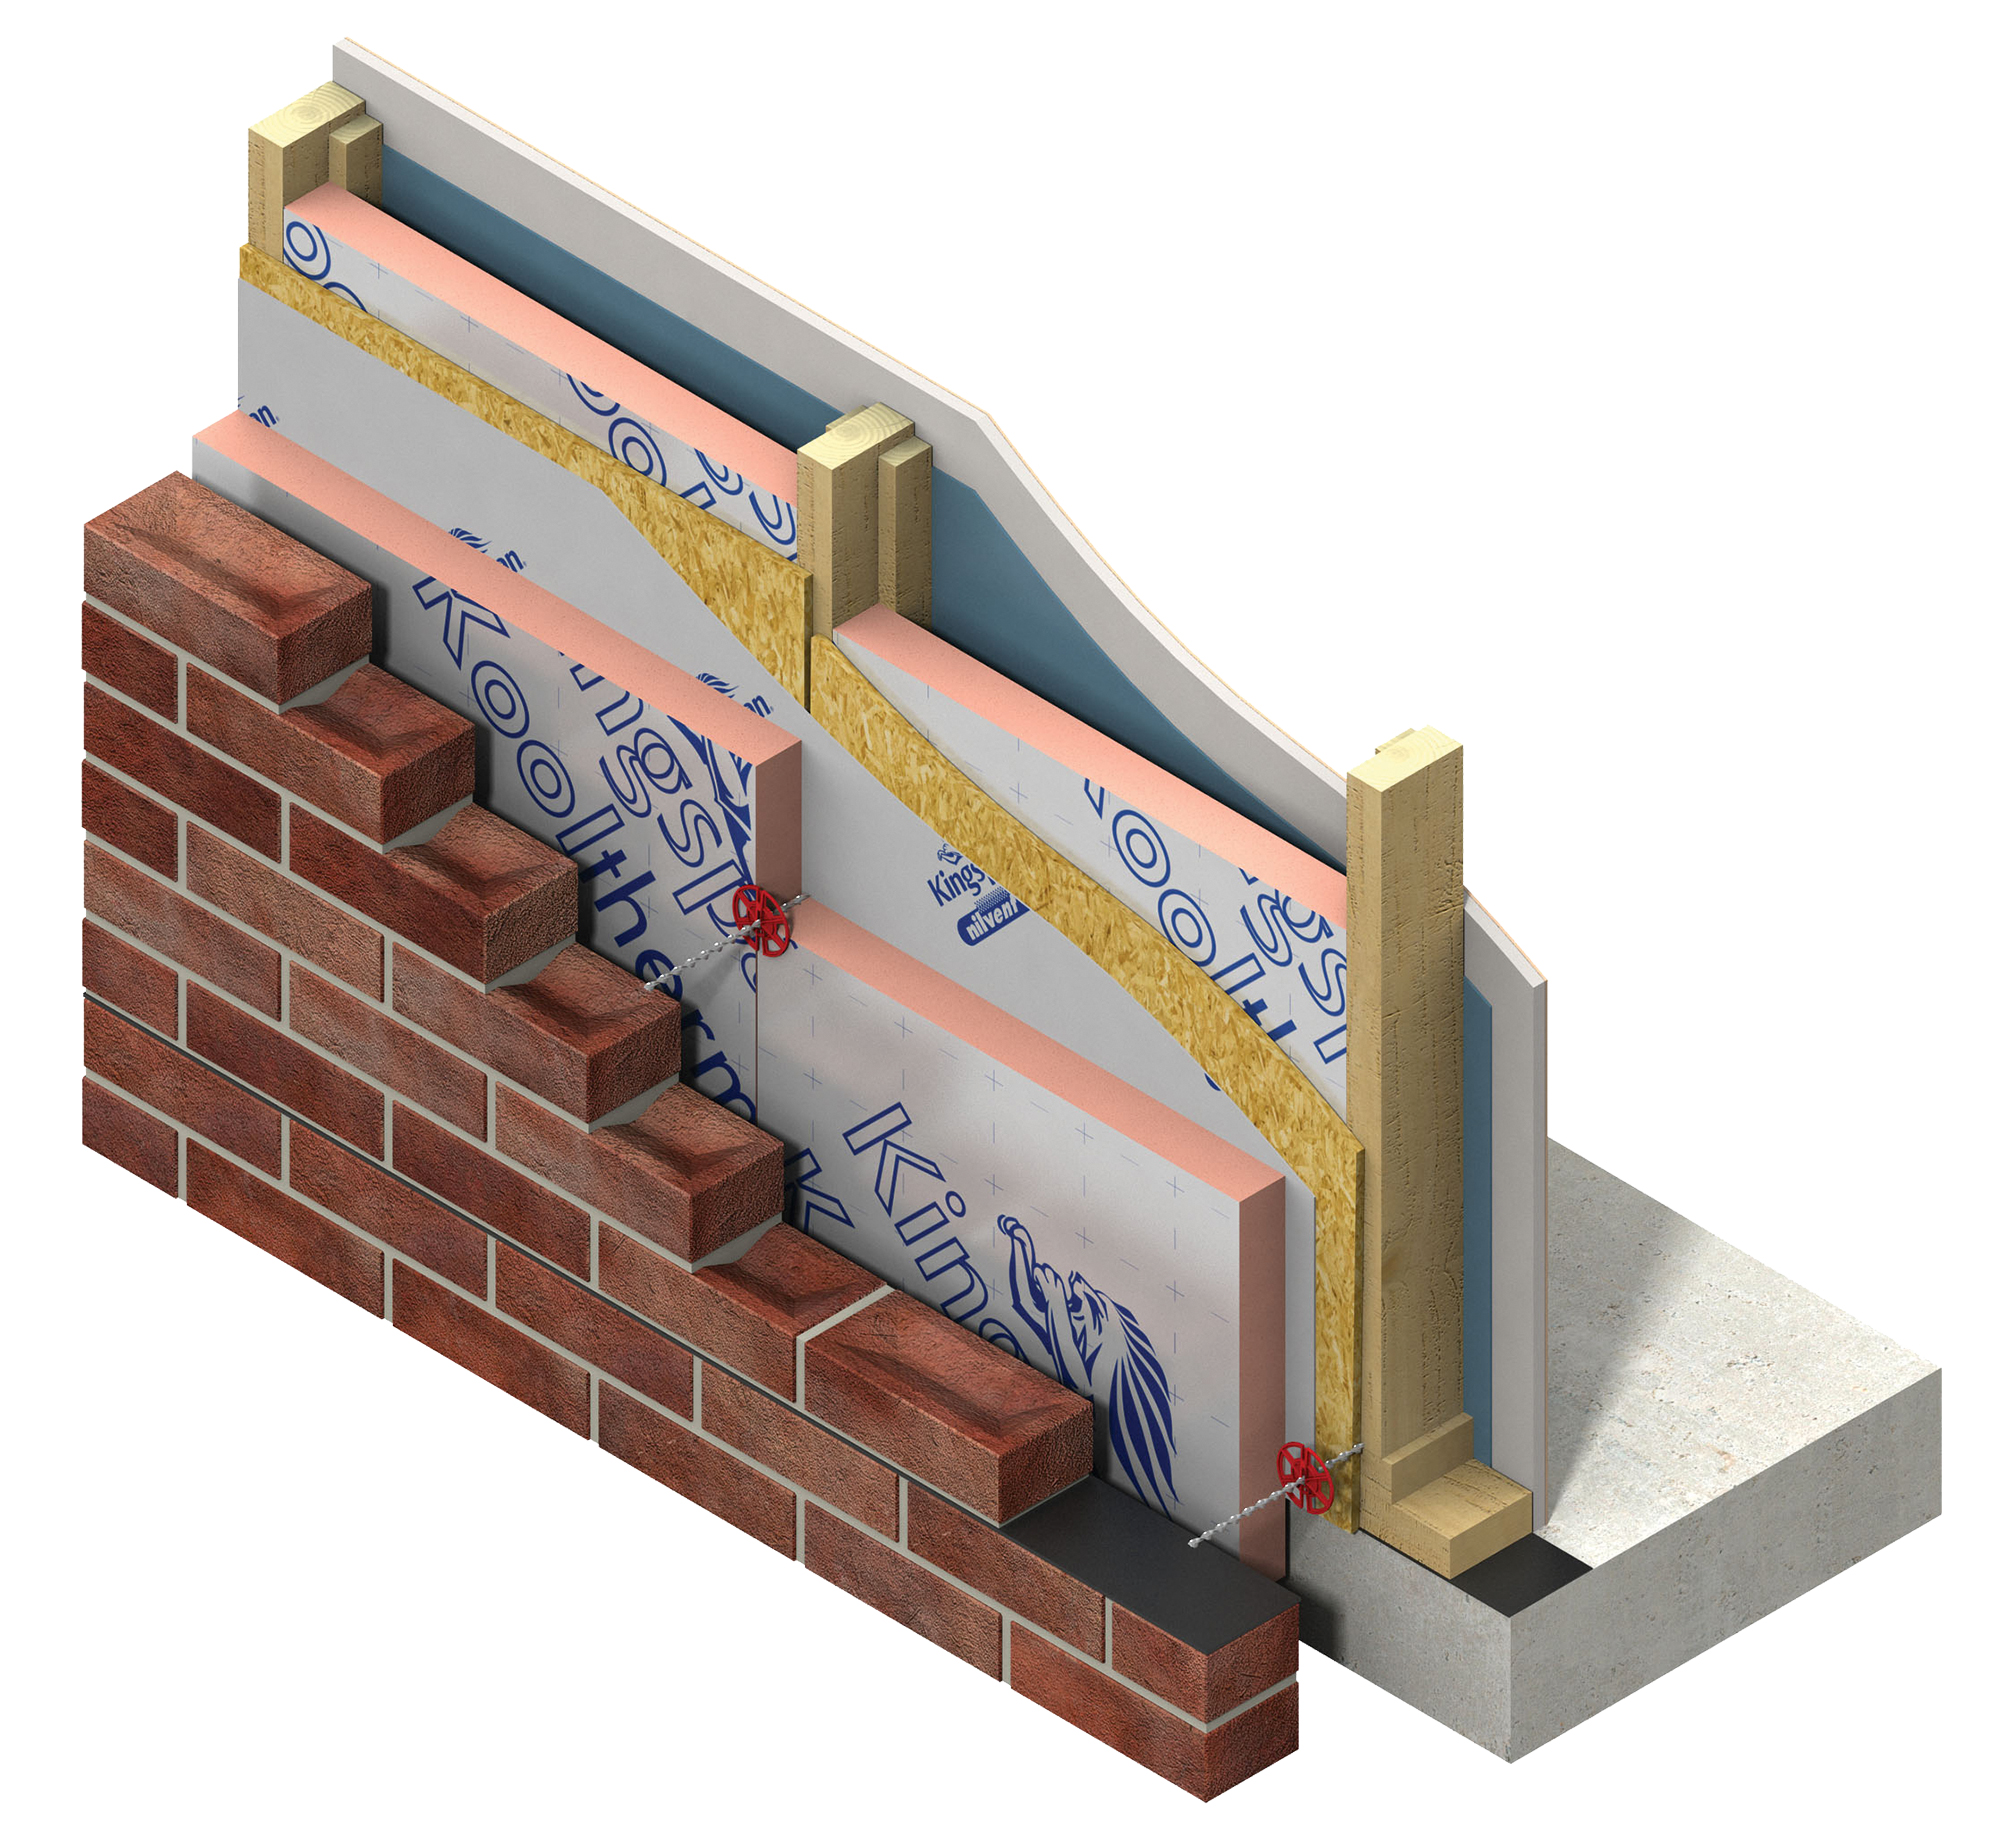  This diagram shows a masonry external wall tied back to a timber frame structure using cavity wall ties. Note the red clips to hold an extra layer of external Kingspan Thermawall insulation in place